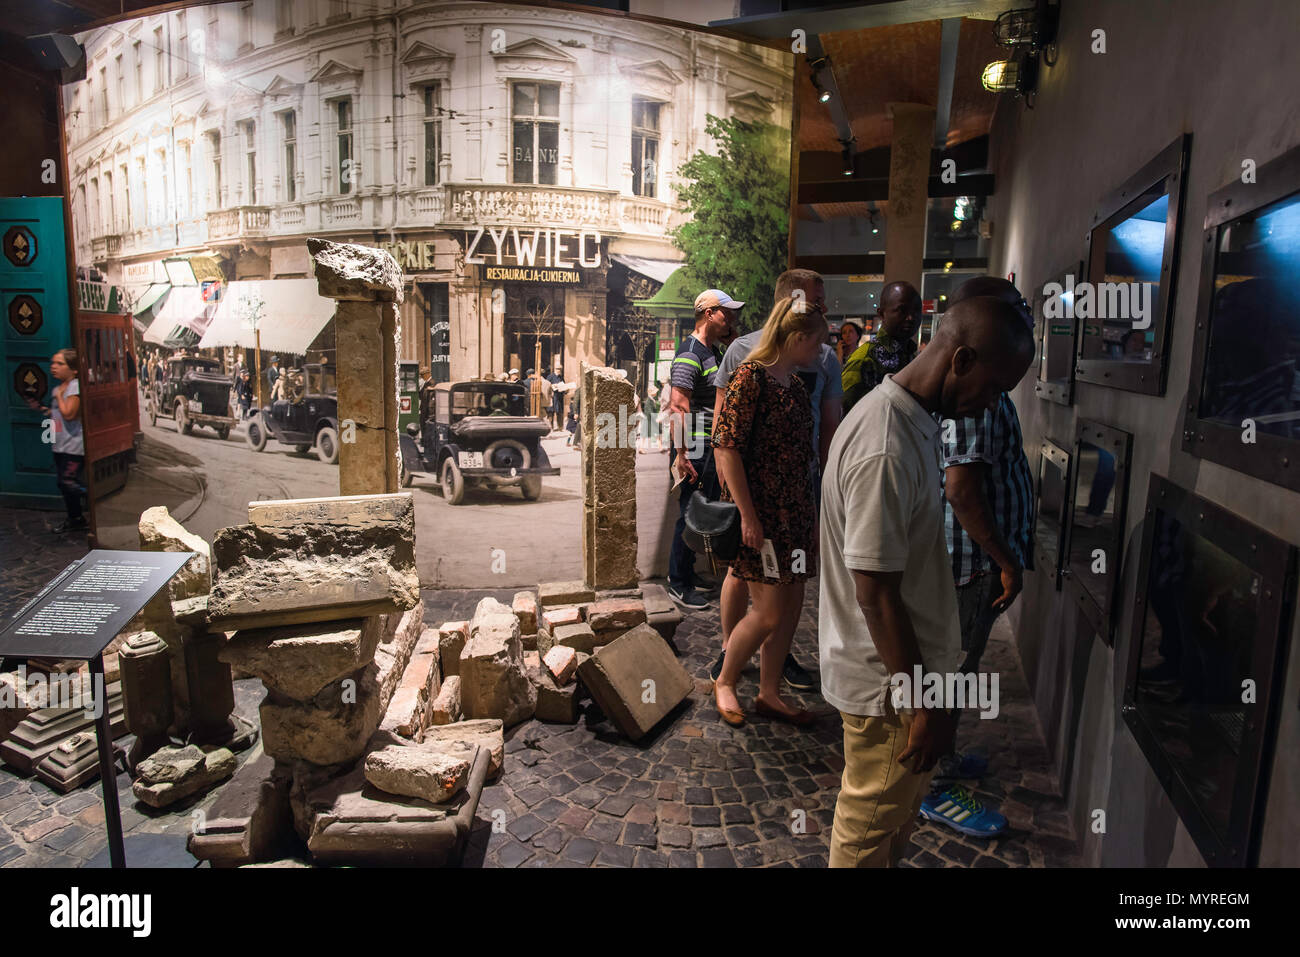 Warsaw Rising Museum, visitors to the museum view displays chronicling  the uprising of the people of Warsaw against Nazi Occupation in 1944, Poland. Stock Photo